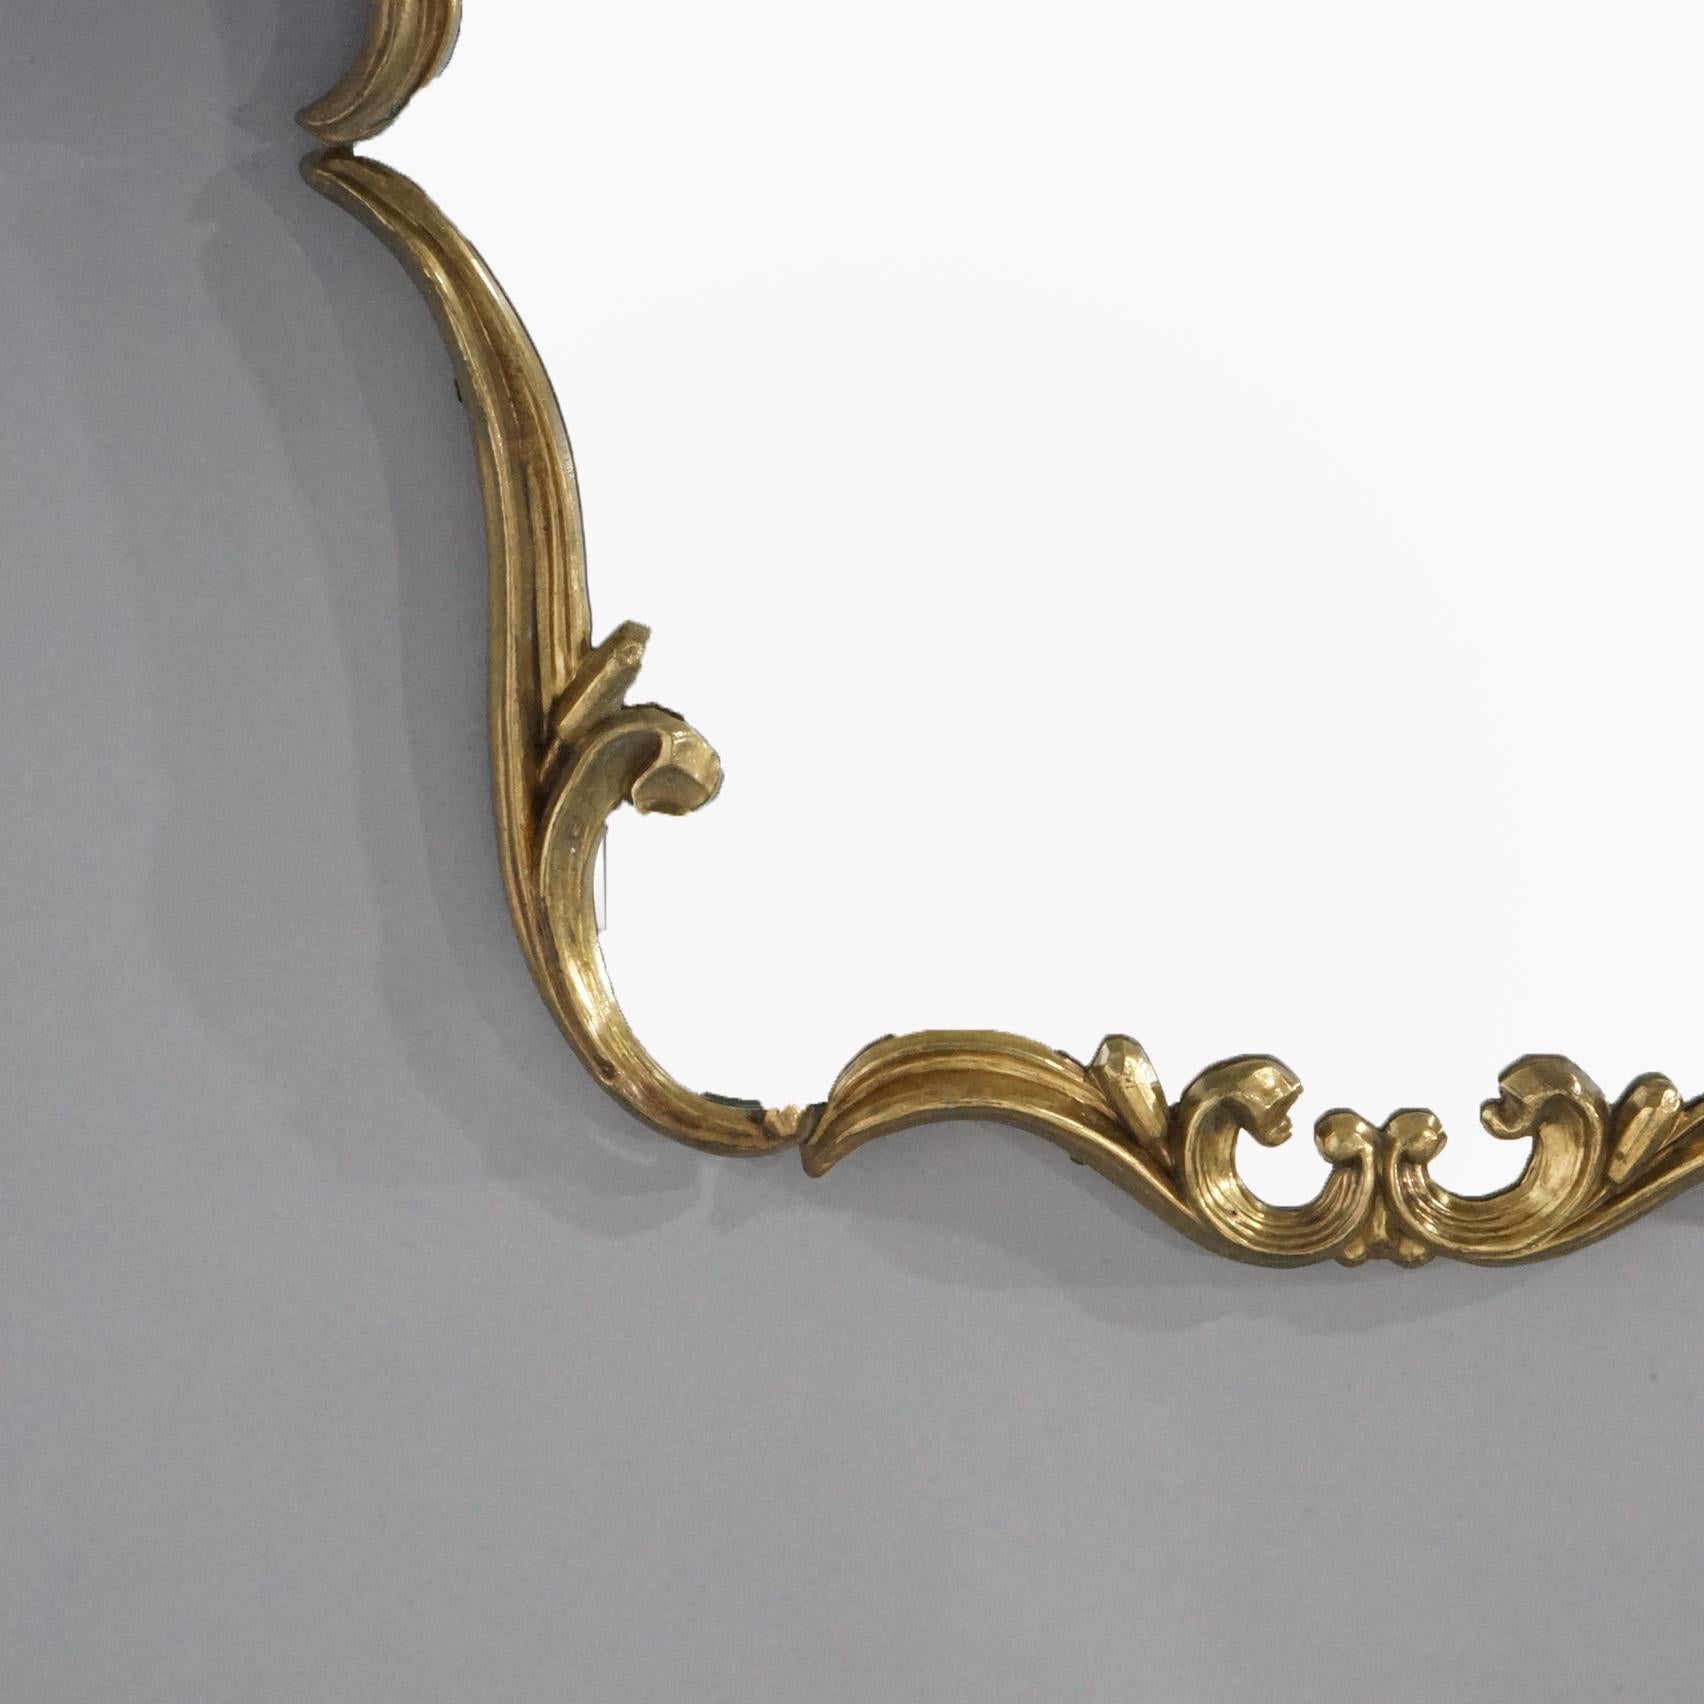 antique gold ornate metal wall mirror